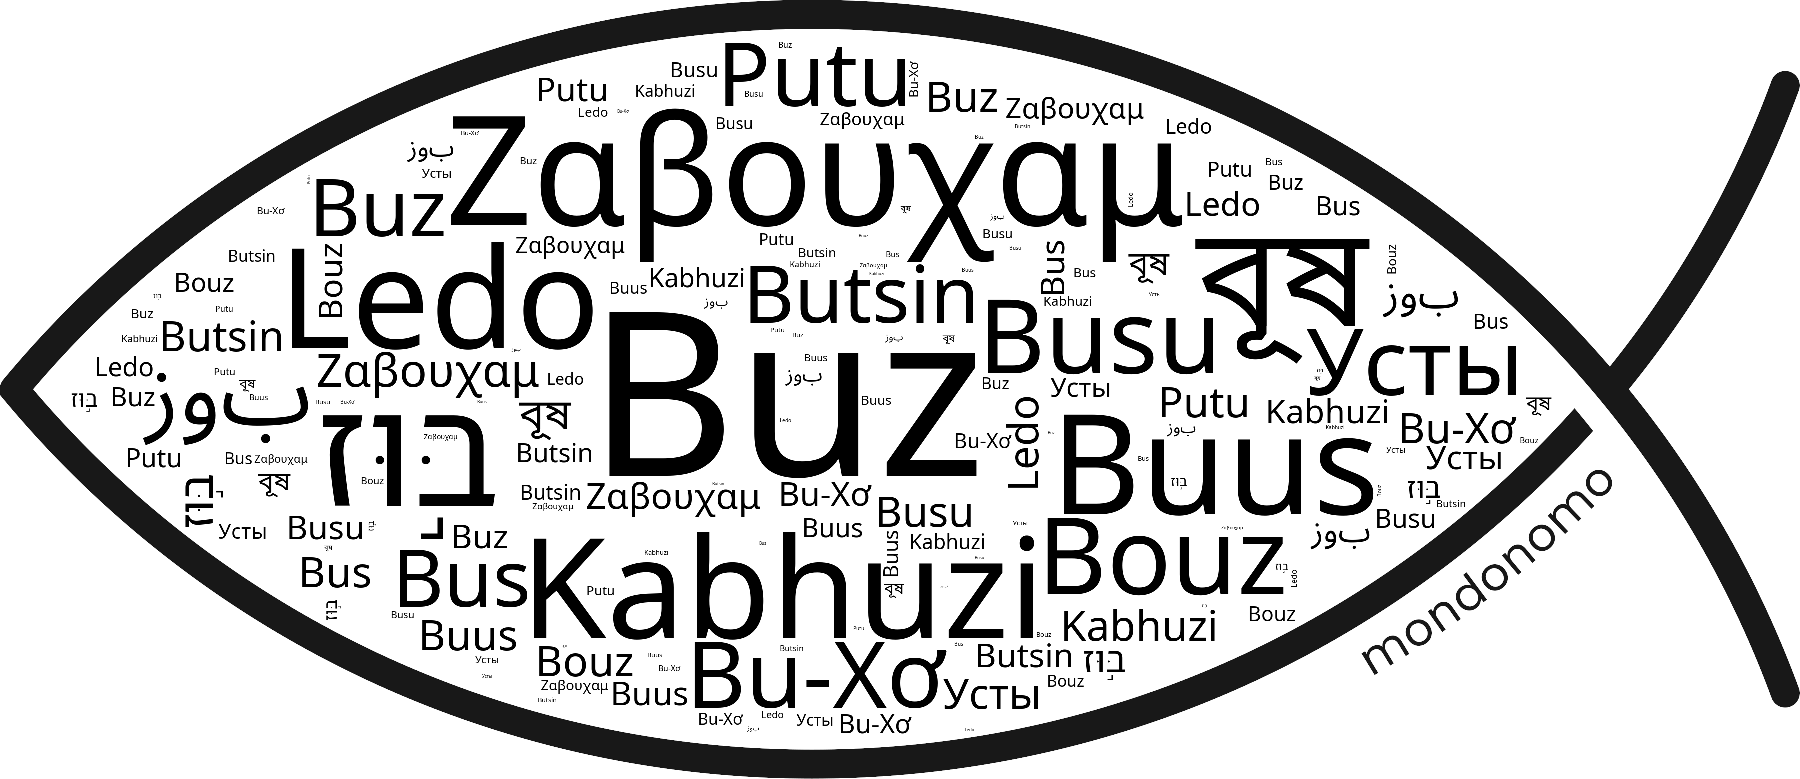 Name Buz in the world's Bibles